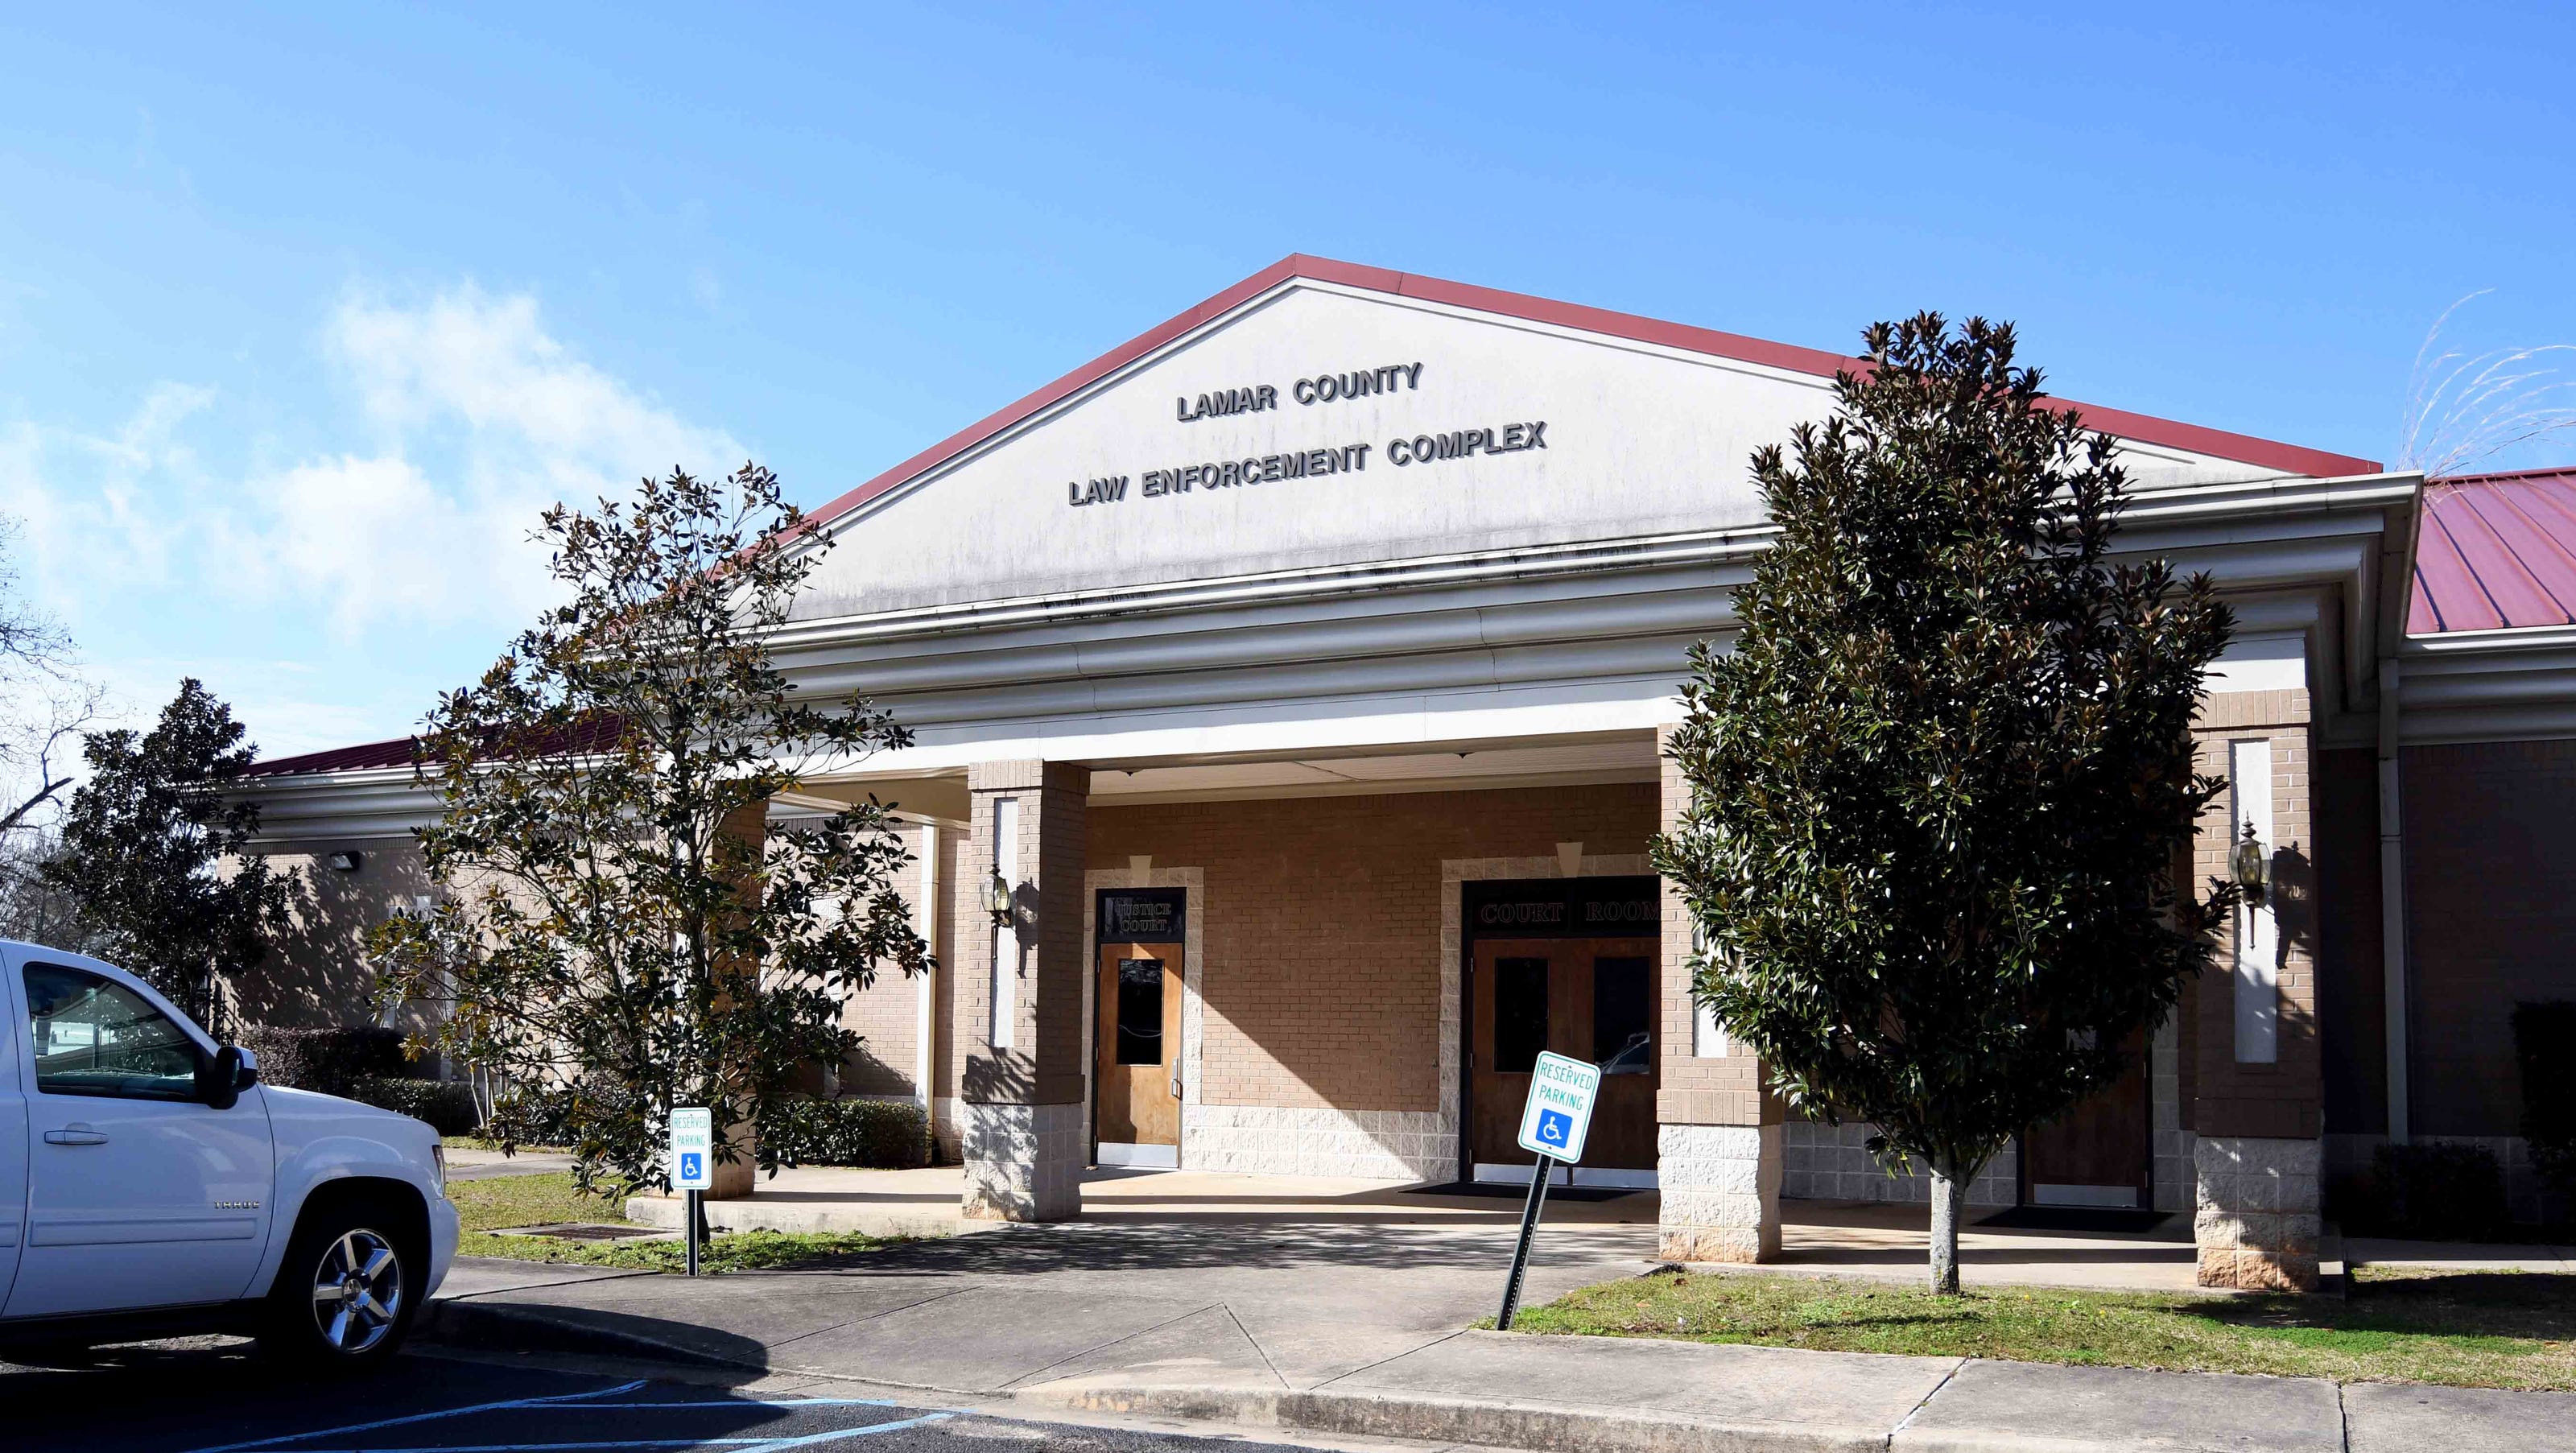 Image of Lamar County Sheriff's Office